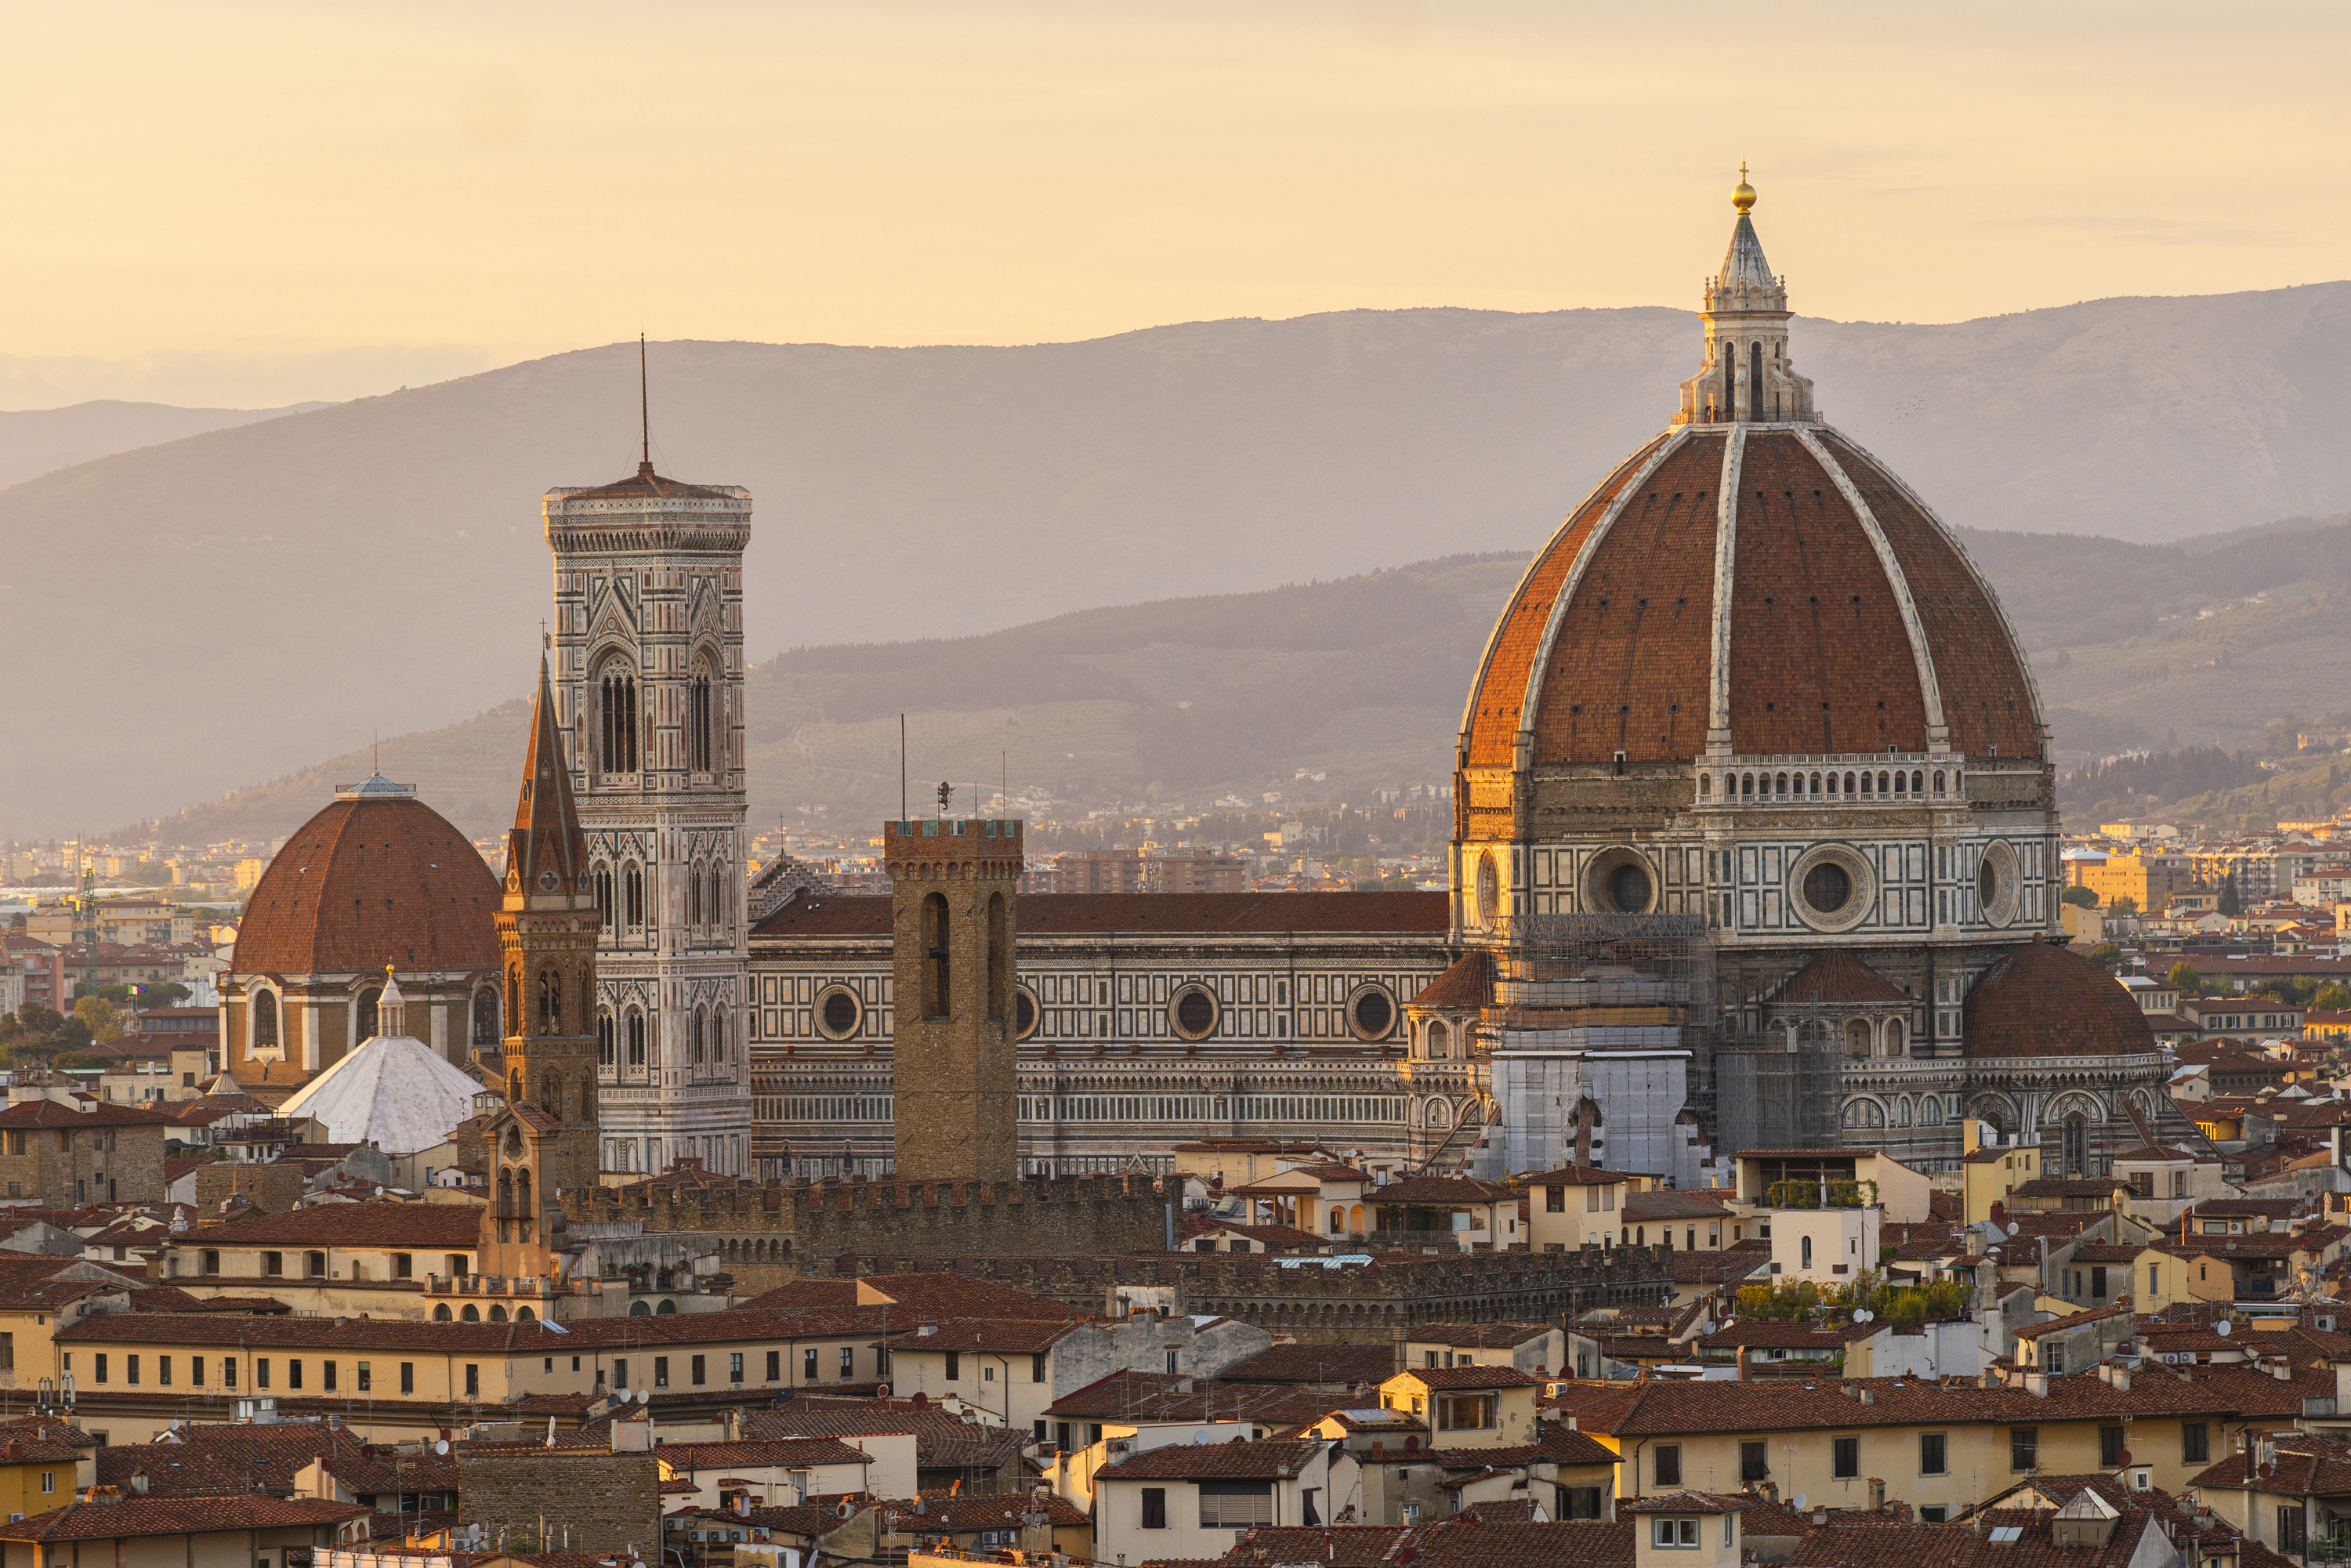 The Florence skyline during golden hour with a hazy mountain range behind the duomo